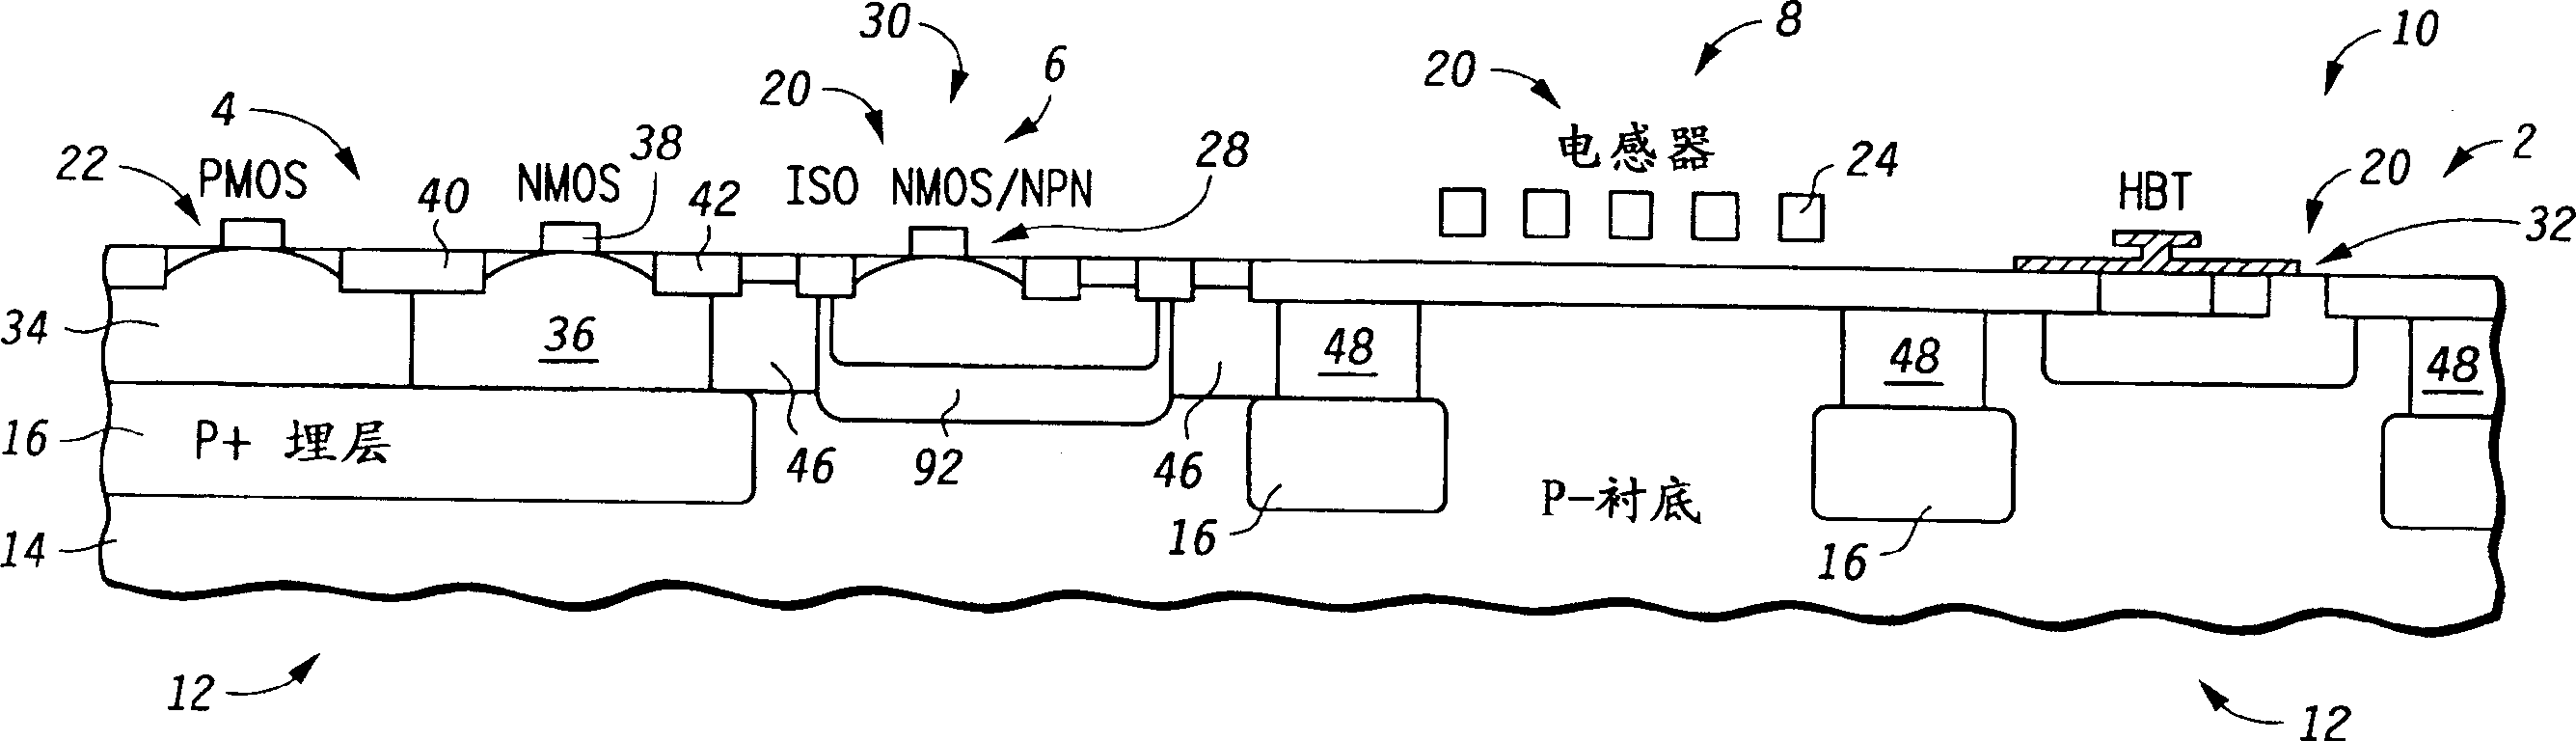 Integrated circuit structure for mixed-signal RF applications and circuits